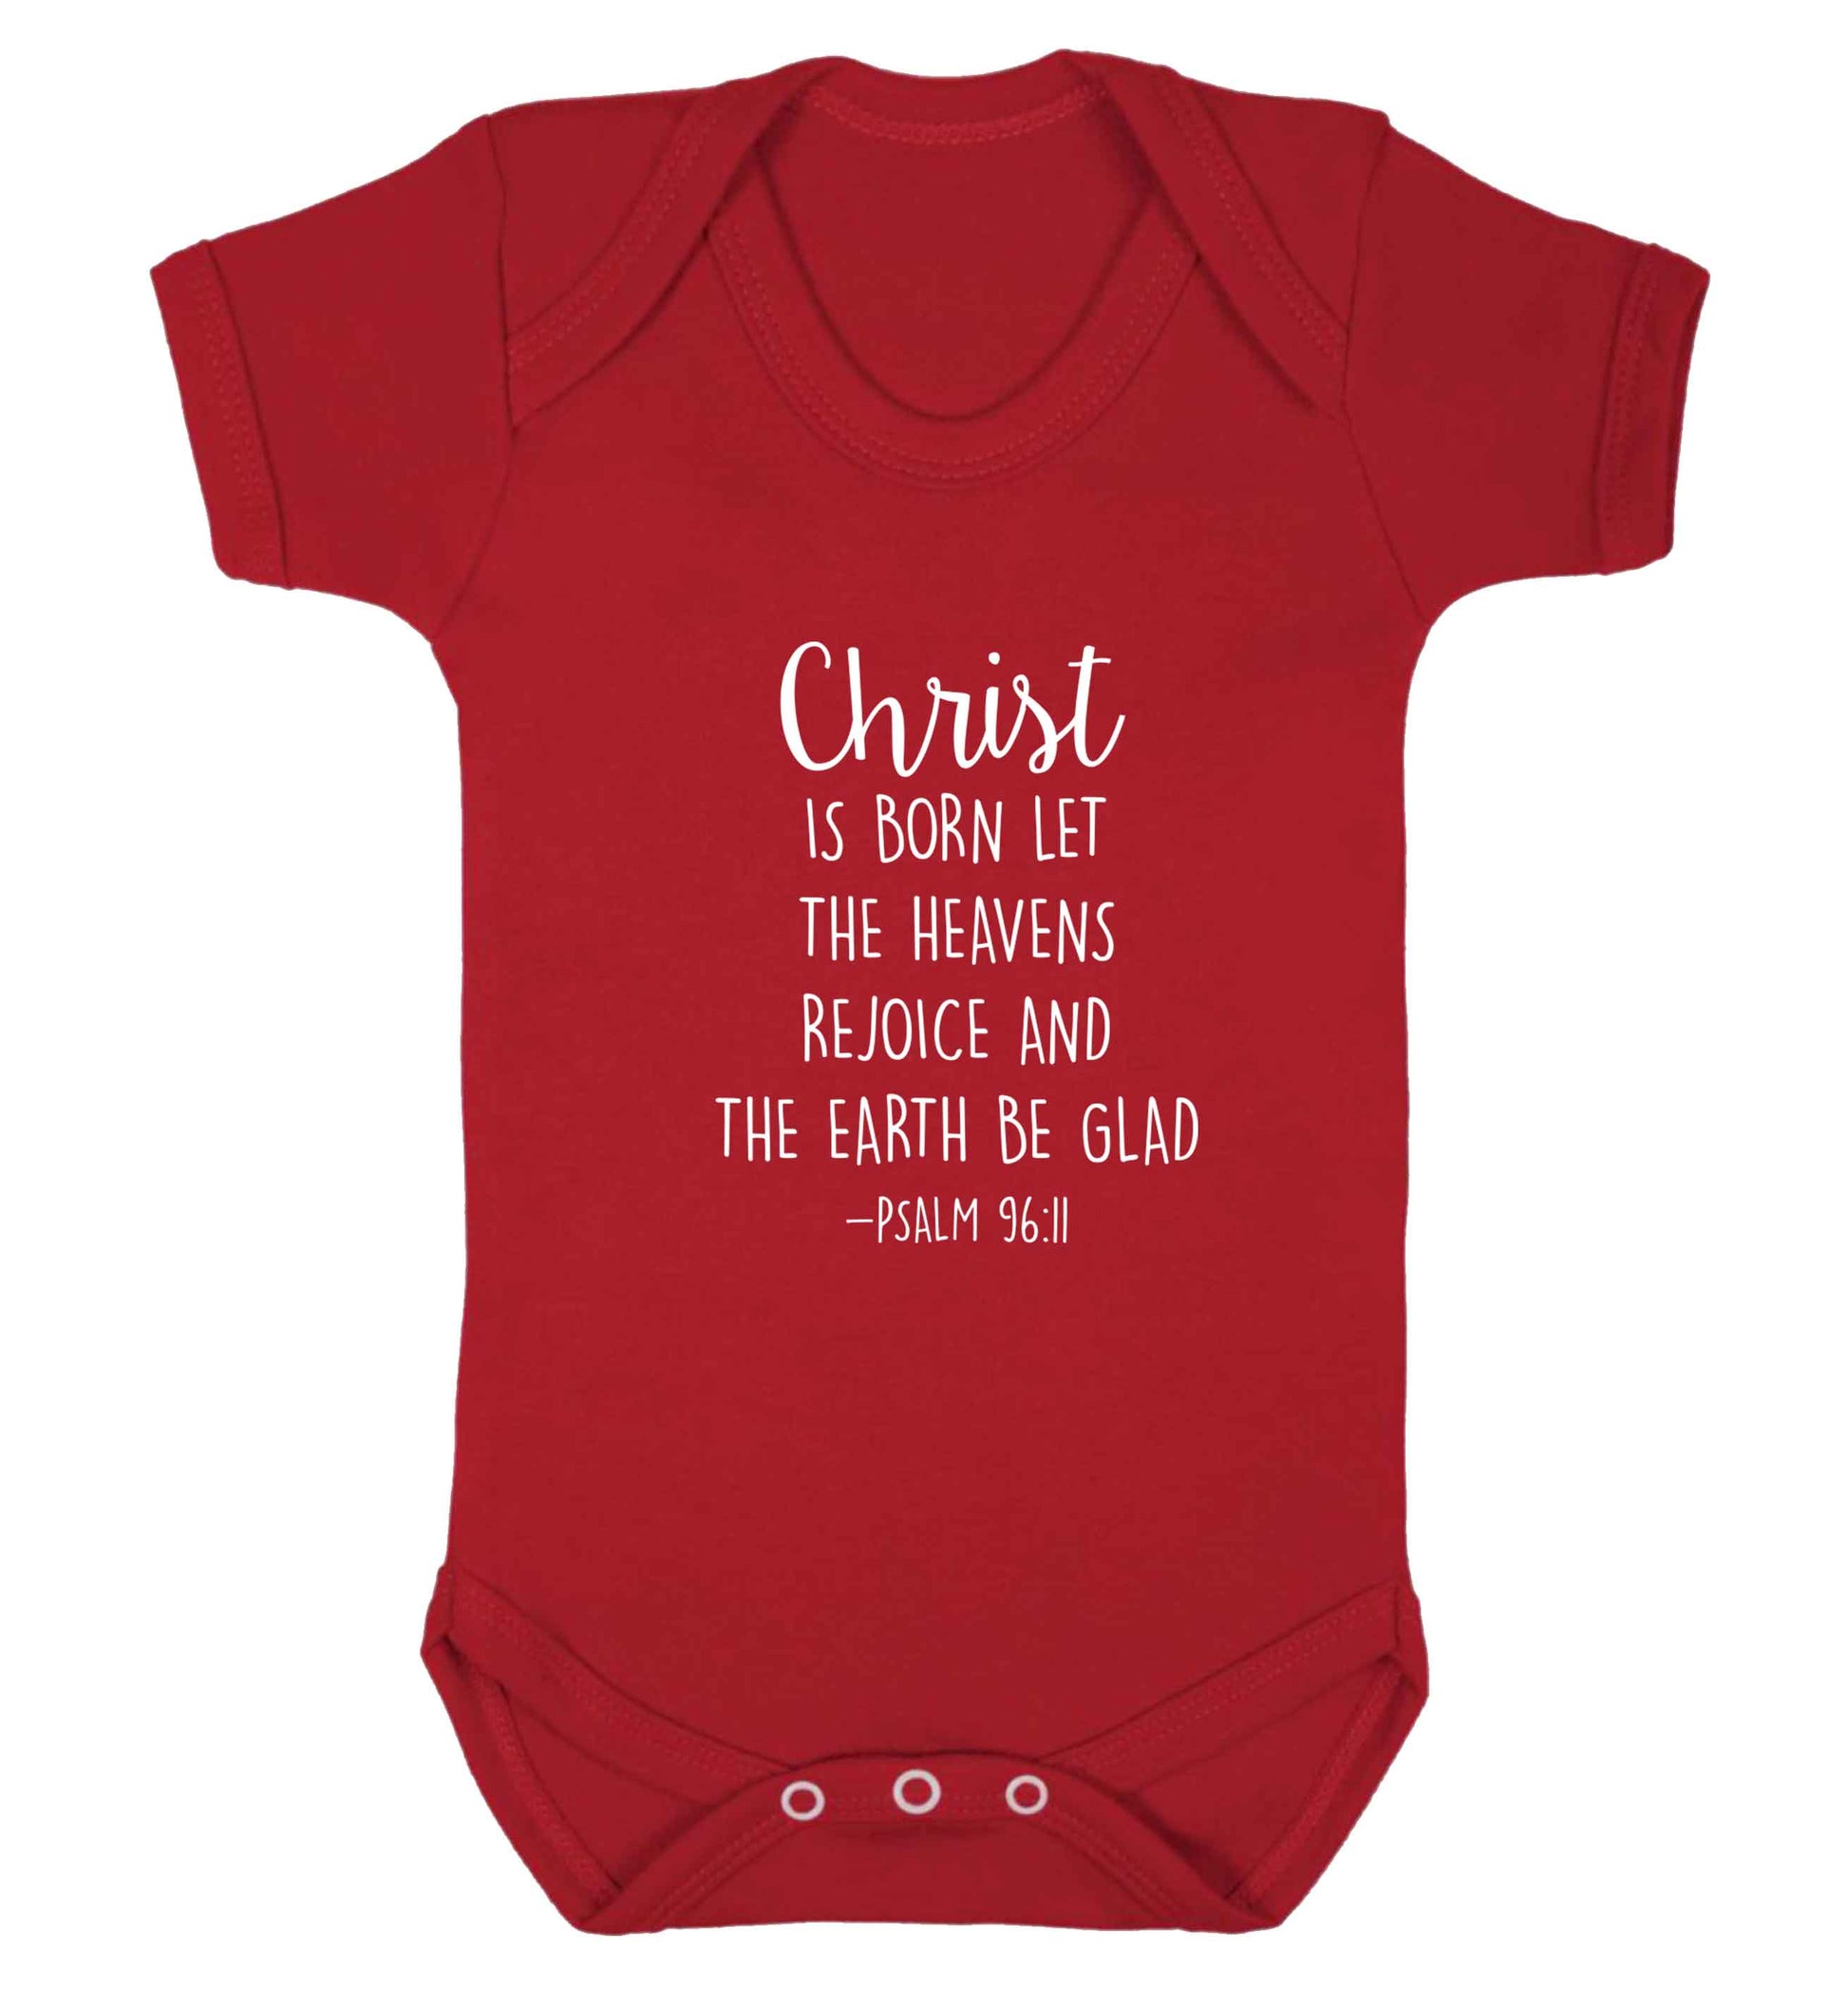 Christ is Born Psalm 96:11 baby vest red 18-24 months